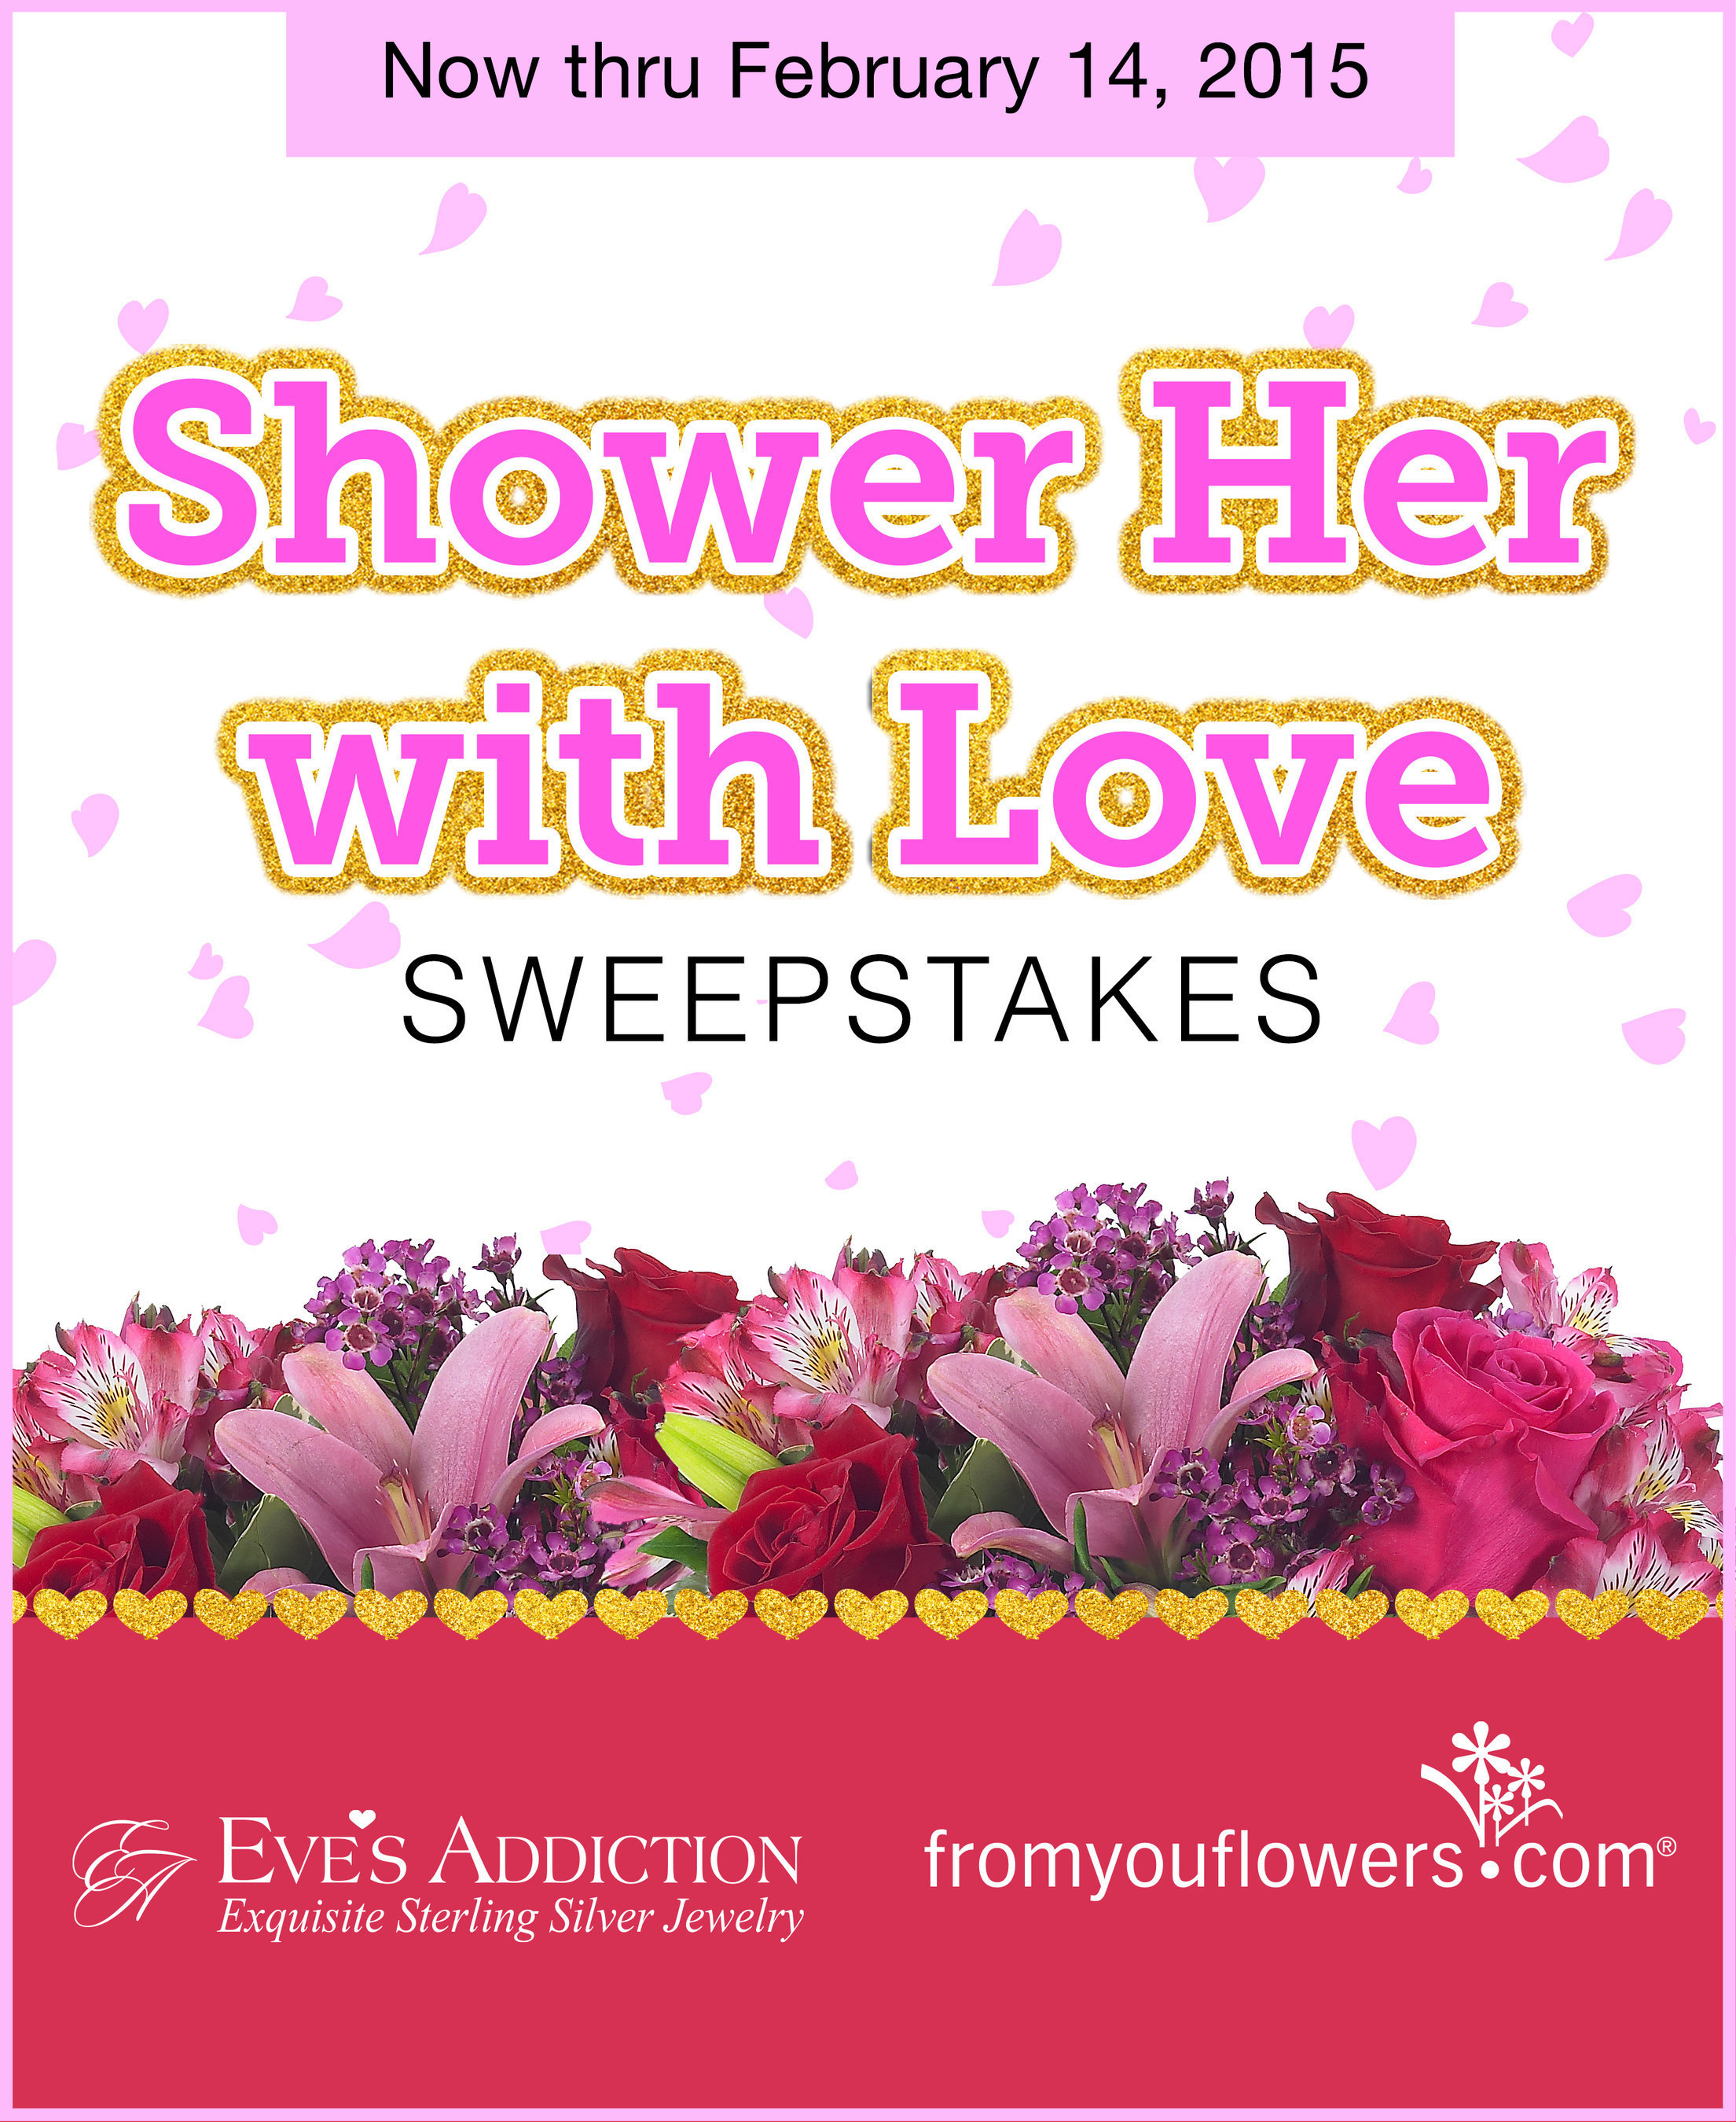 Get 2 Chances to Win the Ultimate Valentine's Day Sweepstakes, Hosted by From You Flowers & Eve's Addiction